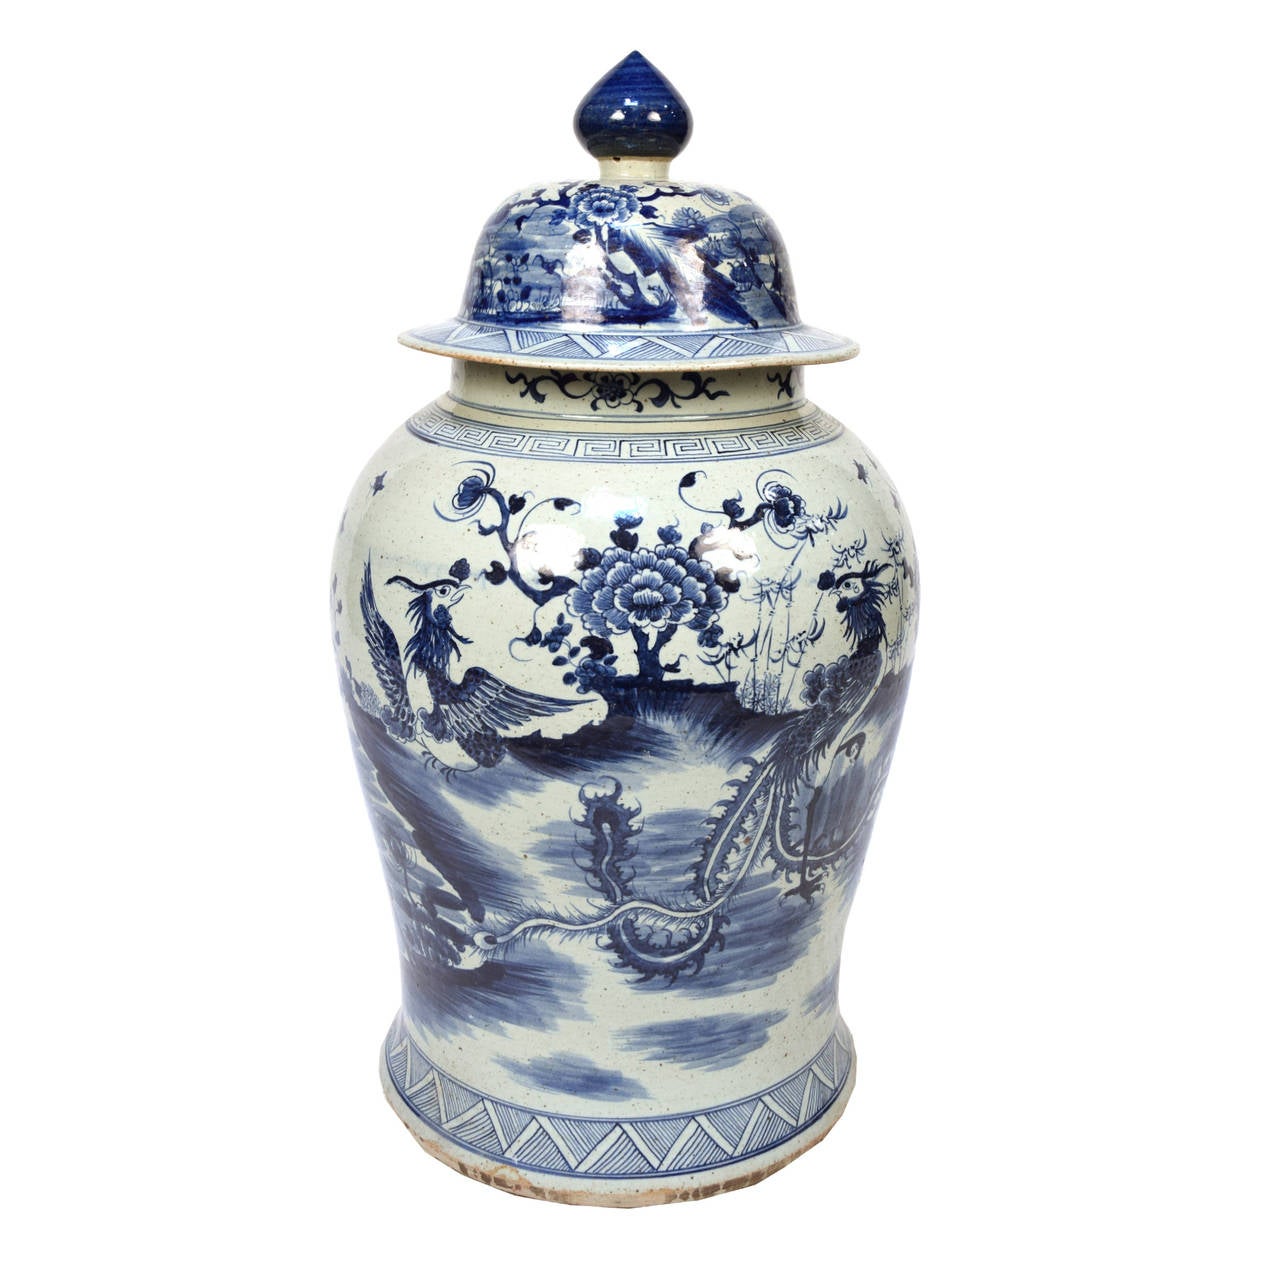 This elegant porcelain jar, in a shape called a ginger jar, was originally intended to hold spices. It is decorated with hand-painted peonies, the “king of flowers” symbolizing wealth; and a phoenix, the “king of birds,” a symbol of peace and